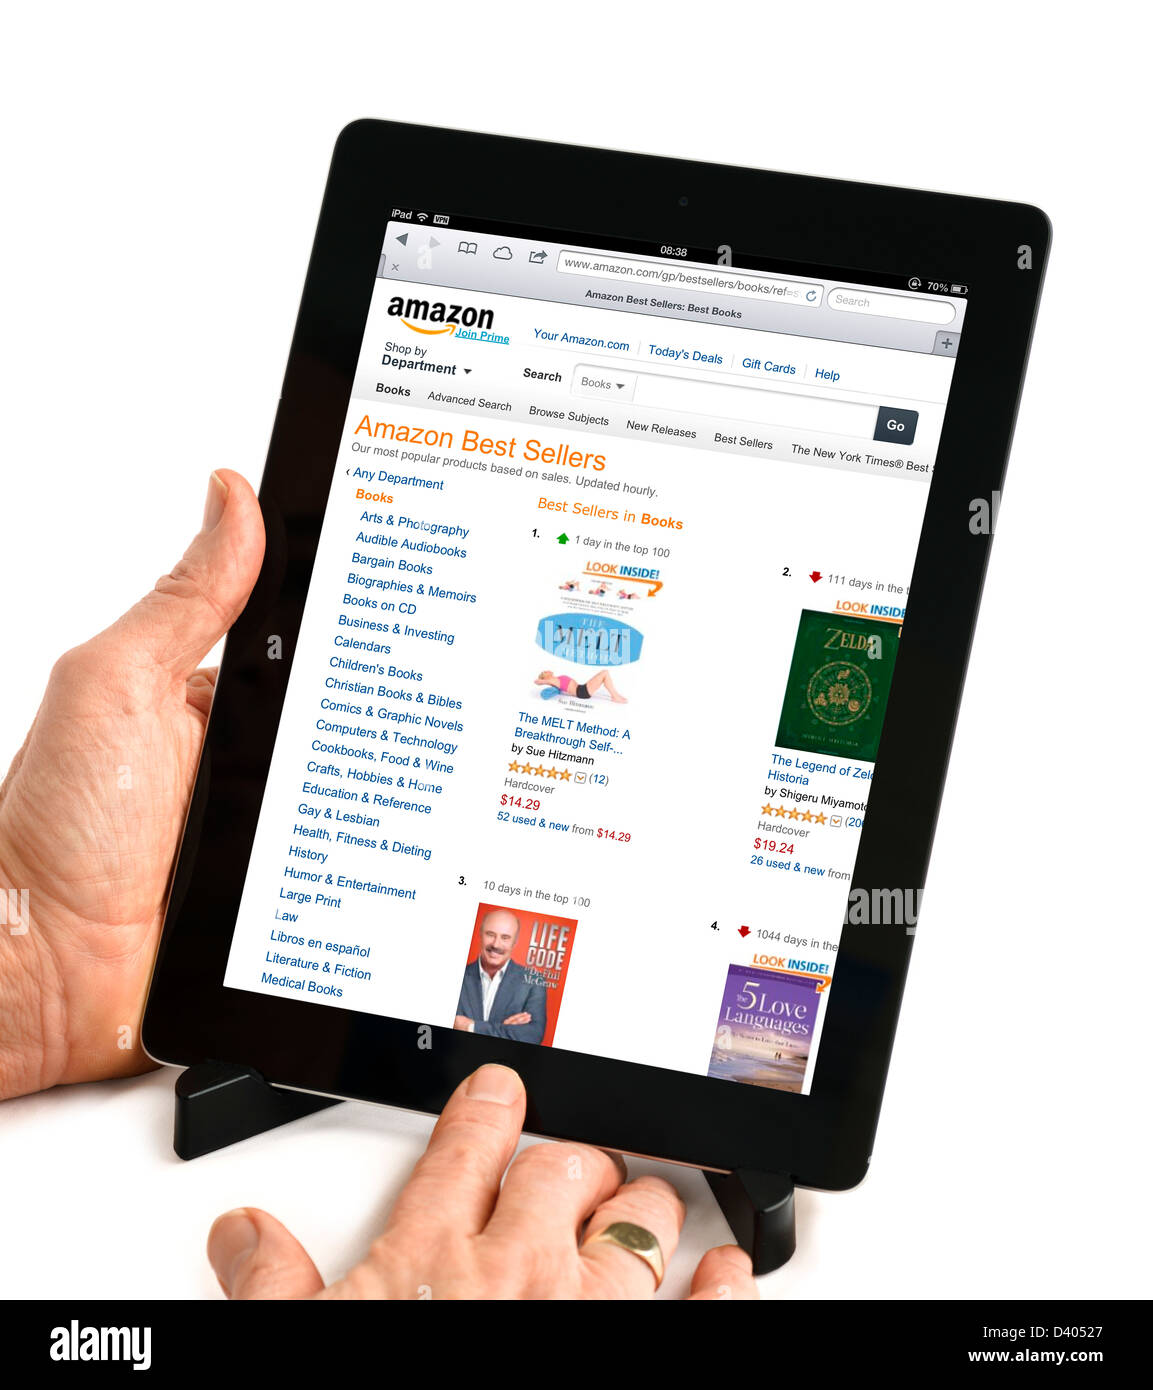 Shopping for books on the amazon.com USA website on a 4th generation Apple iPad tablet computer Stock Photo